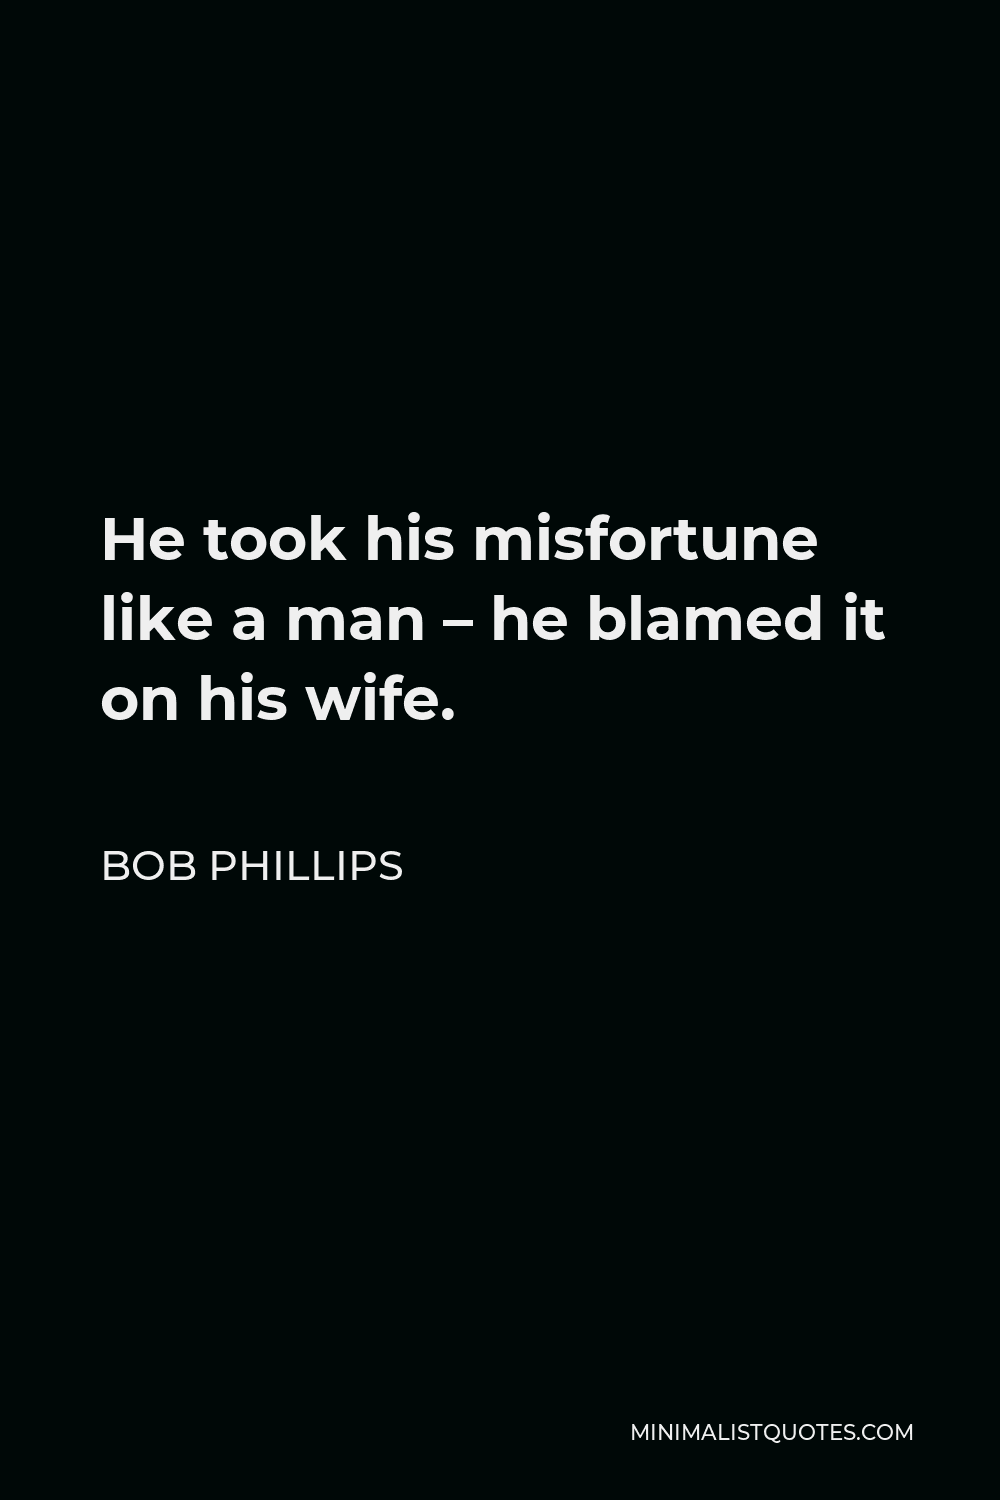 Bob Phillips Quote - He took his misfortune like a man – he blamed it on his wife.